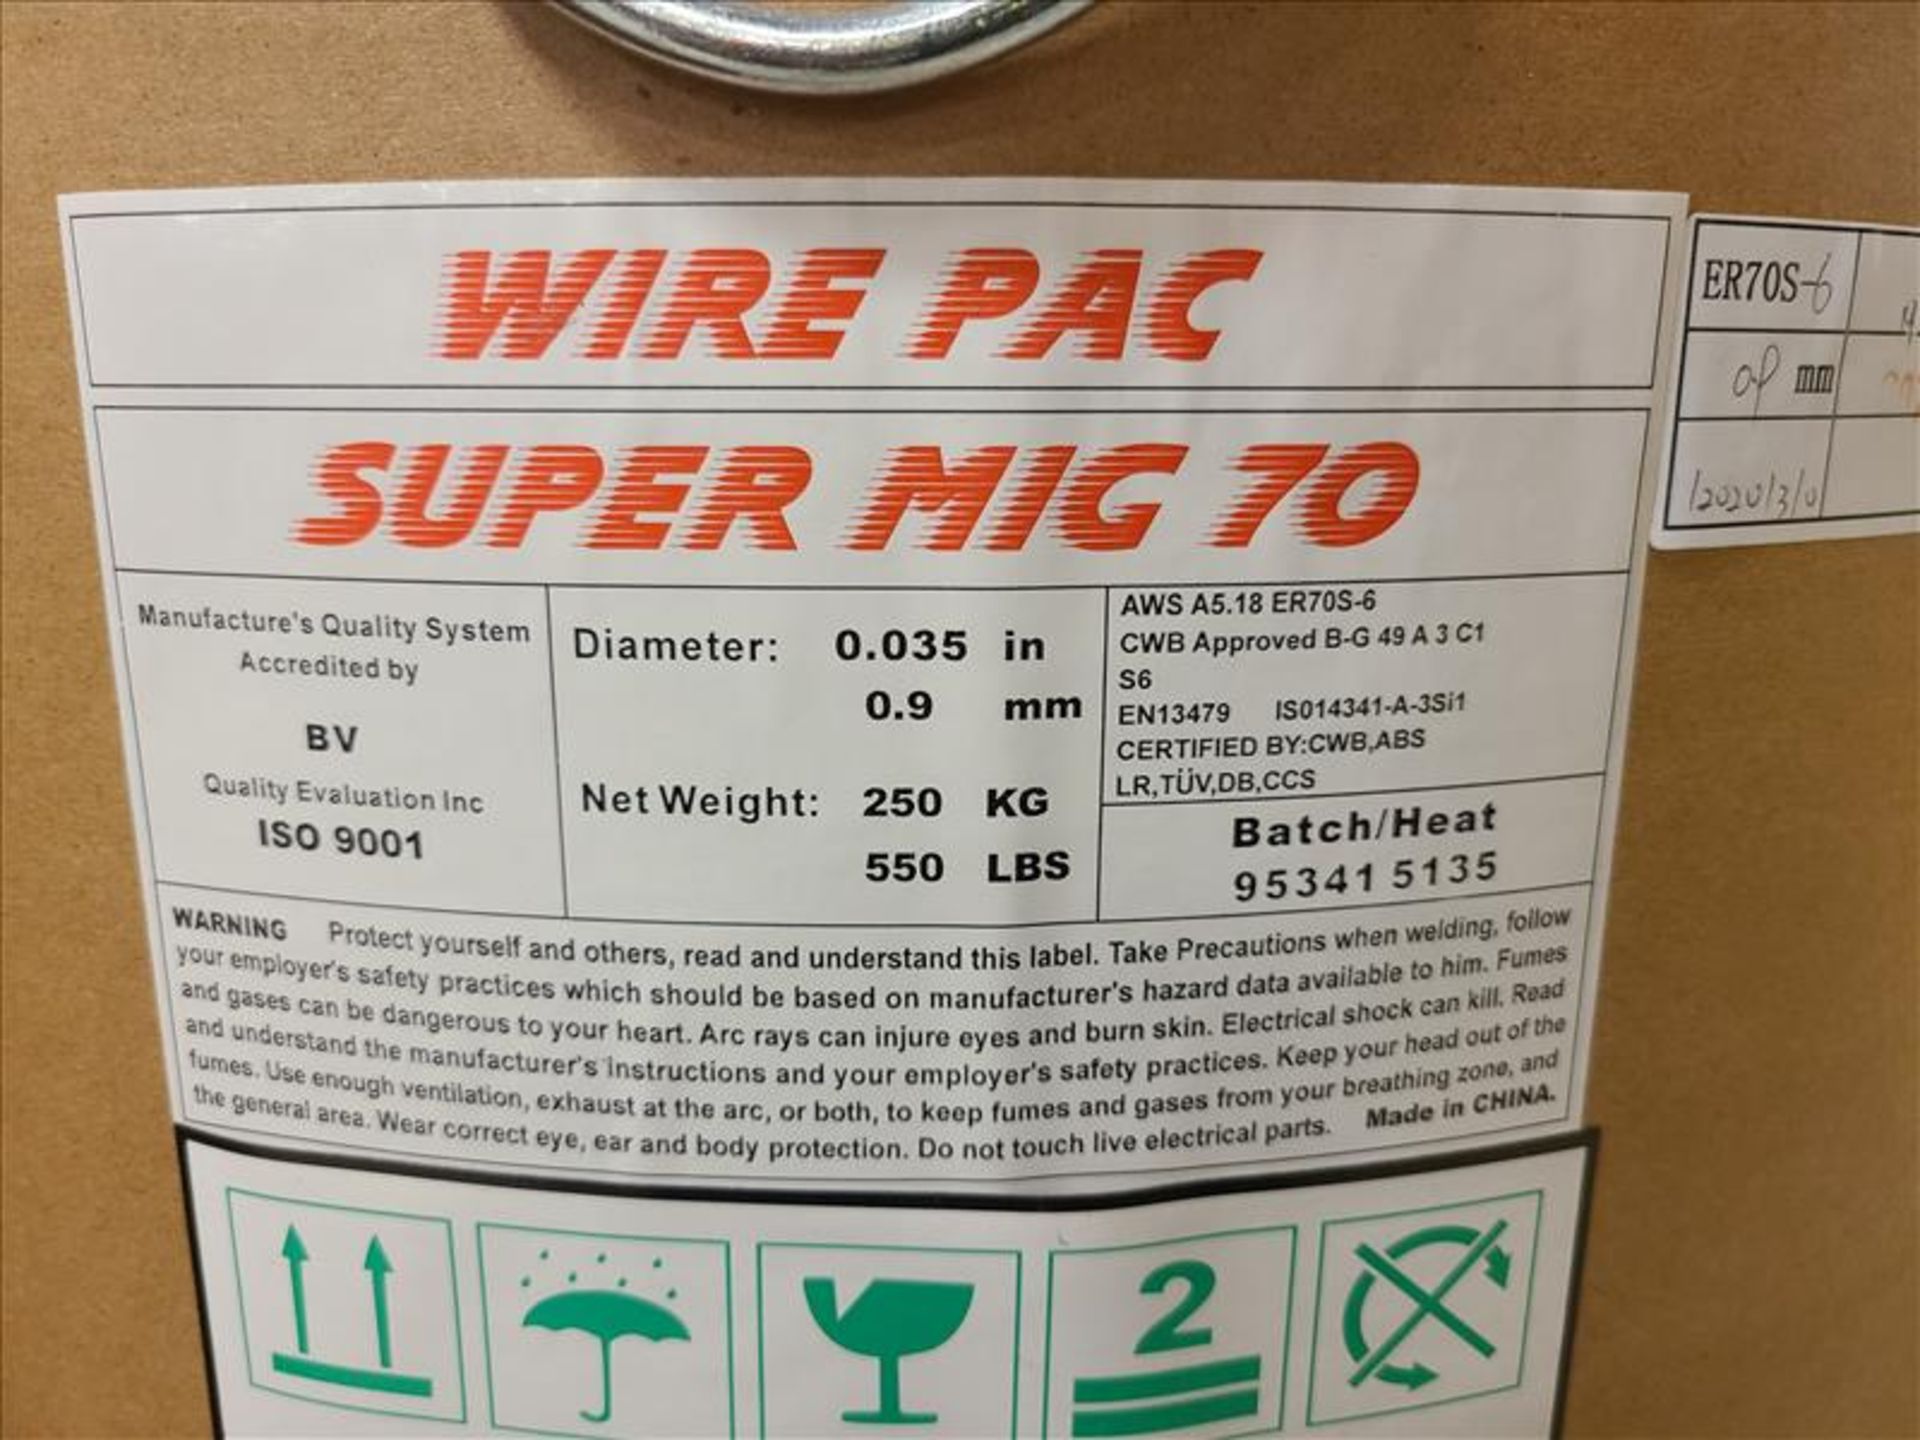 (4) WIREPAC SuperMIG70 Welding Wire Drums, 0.9 mm (Partial) - Image 4 of 8